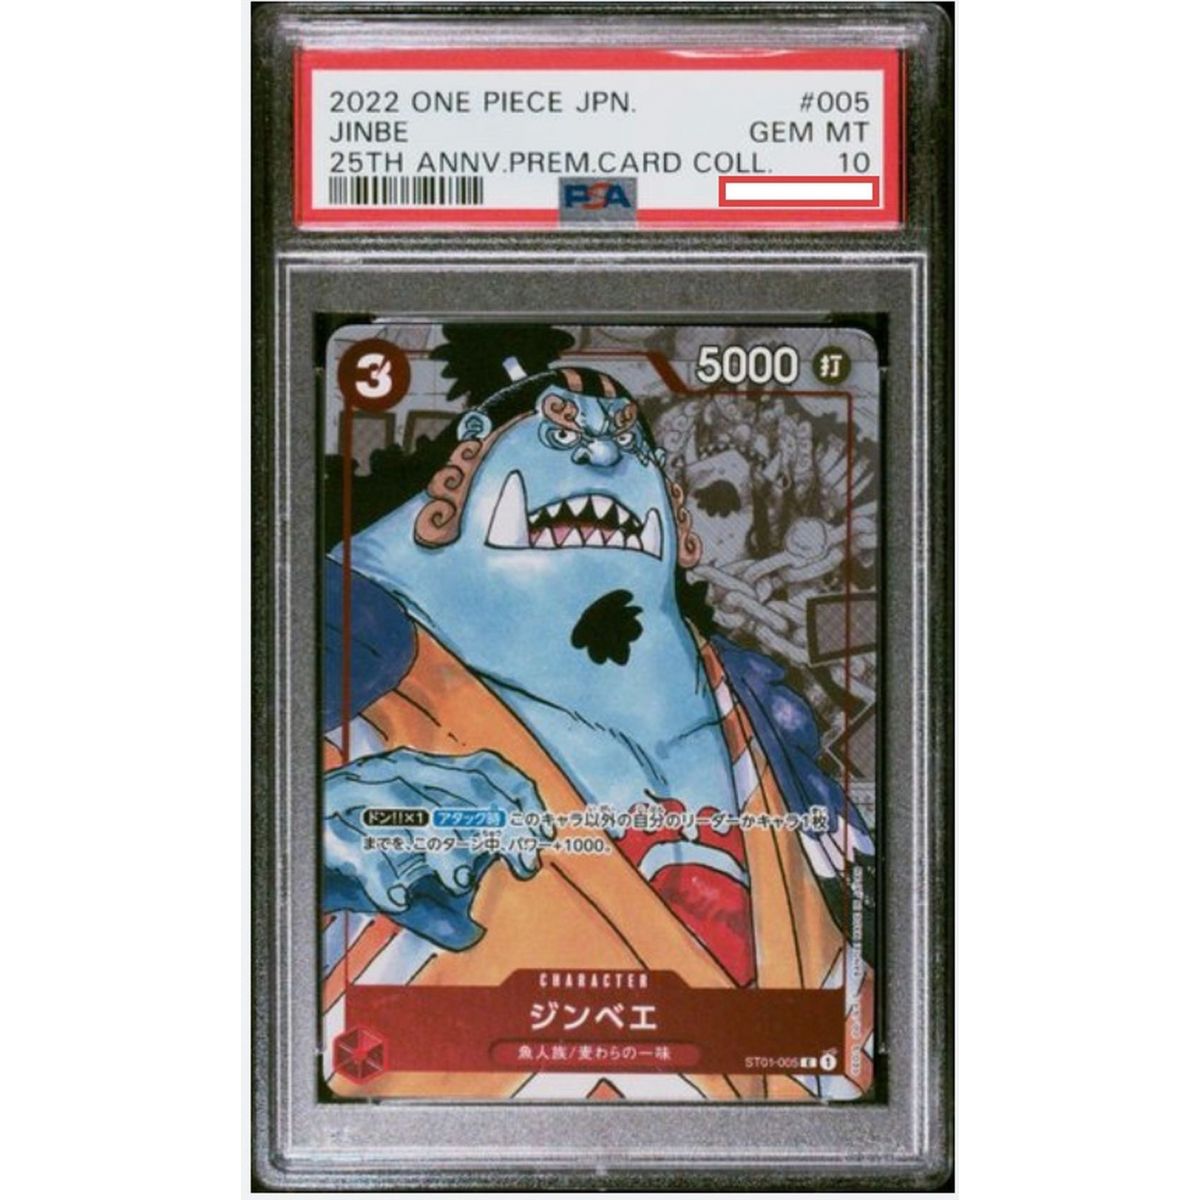 One Piece - Promo - Jinbe - ST01-005 - 25th Anniversary Premium Card Collection - Graded PSA 10 - JP